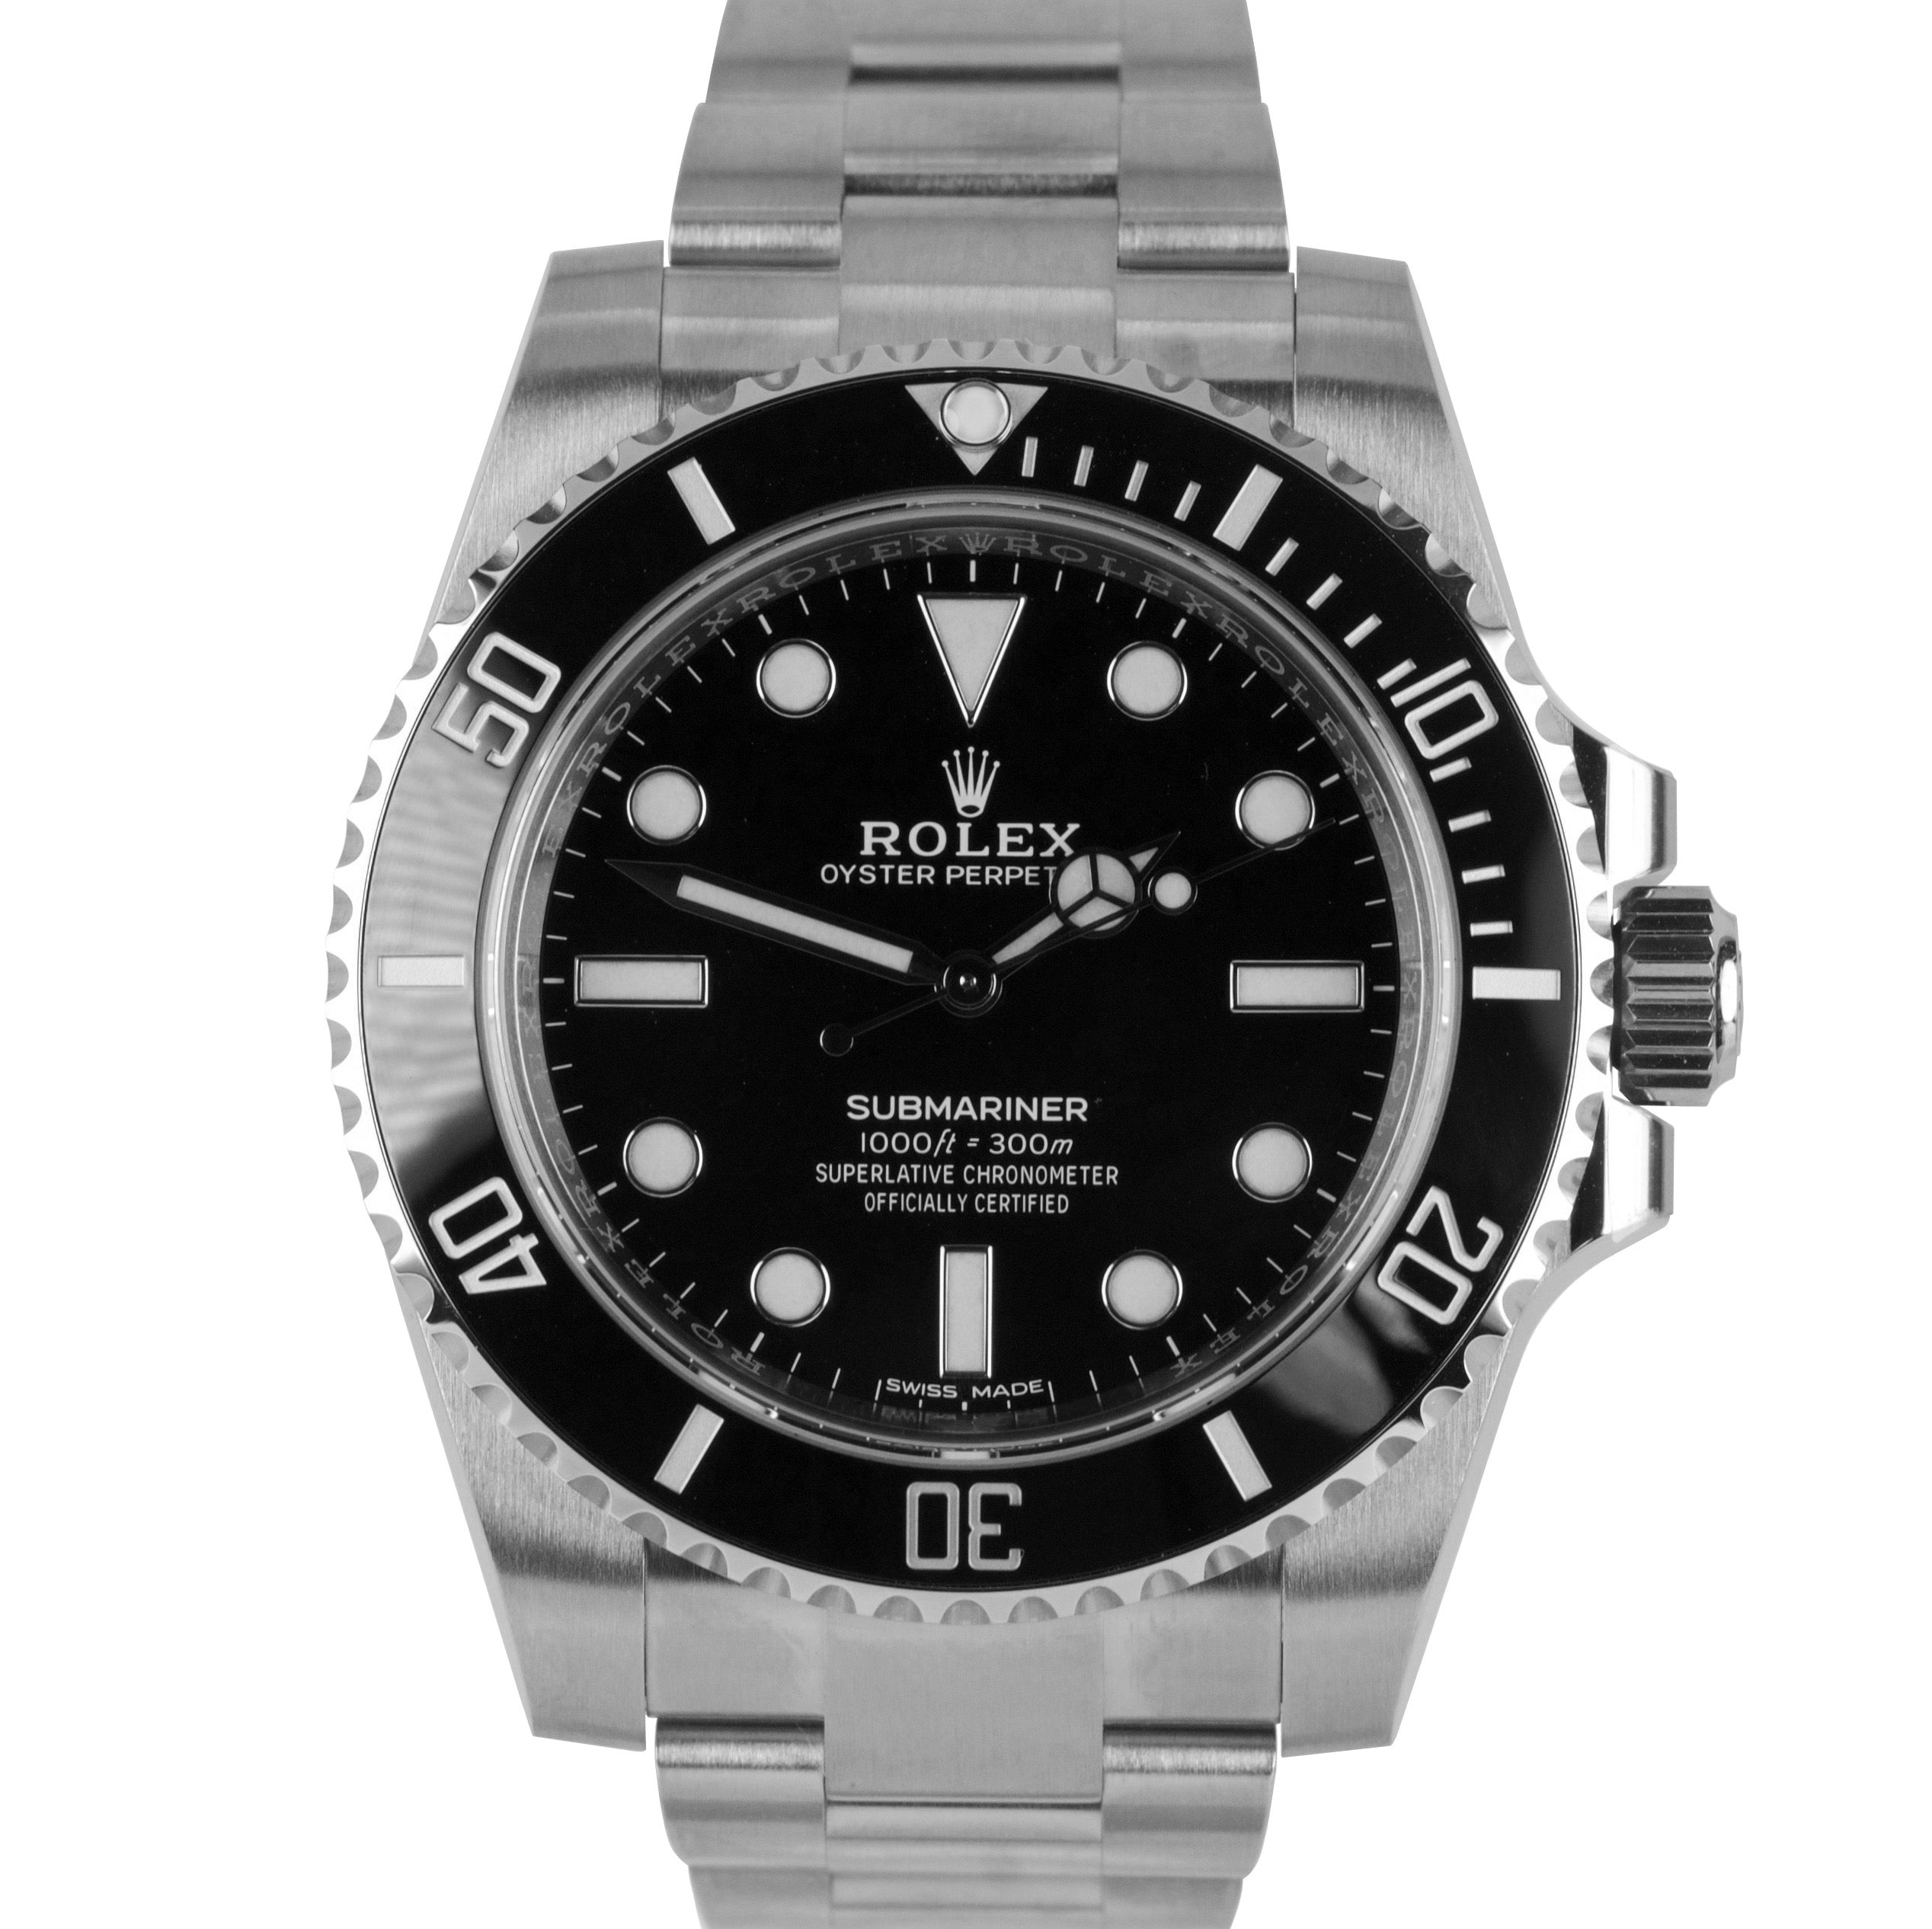 SEP 2019 UNPOLISHED Rolex Submariner No-Date Stainless Steel 40mm Watch 114060